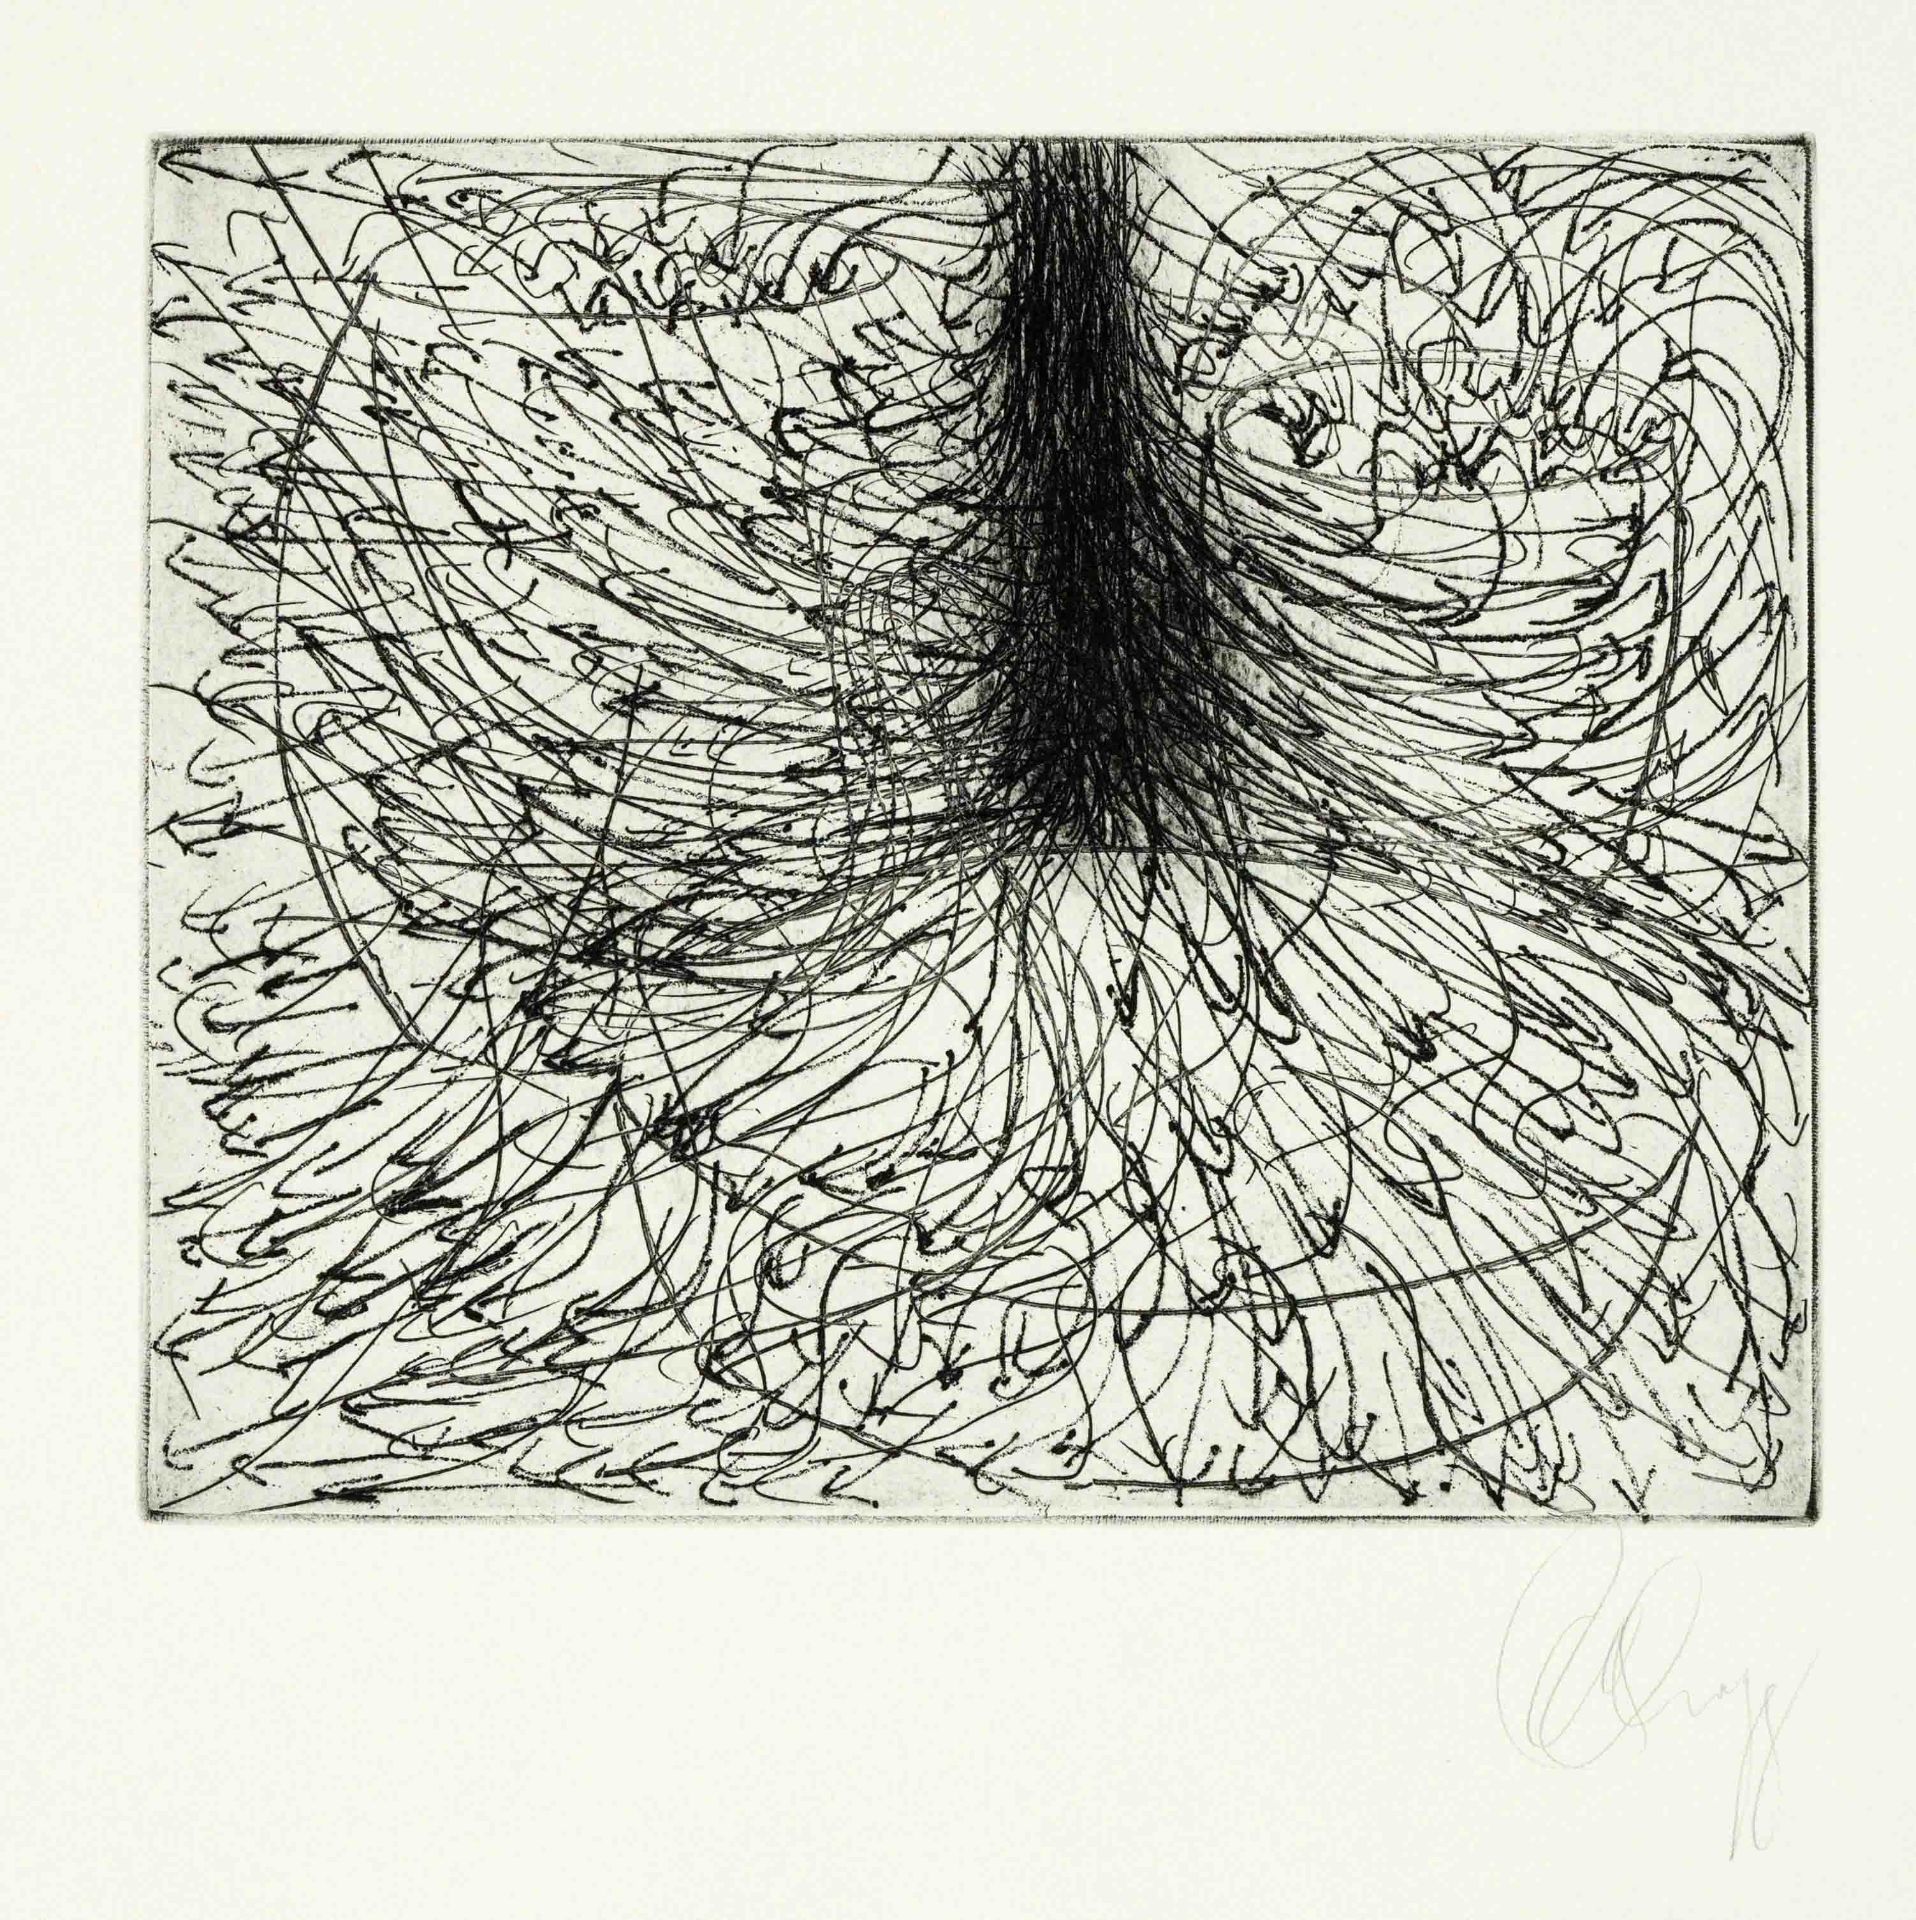 Tony Cragg (*1949), series of 6 etchings on Zerkall laid paper, 1994, ''Dinge'', ''Herbst'', '' - Image 2 of 4